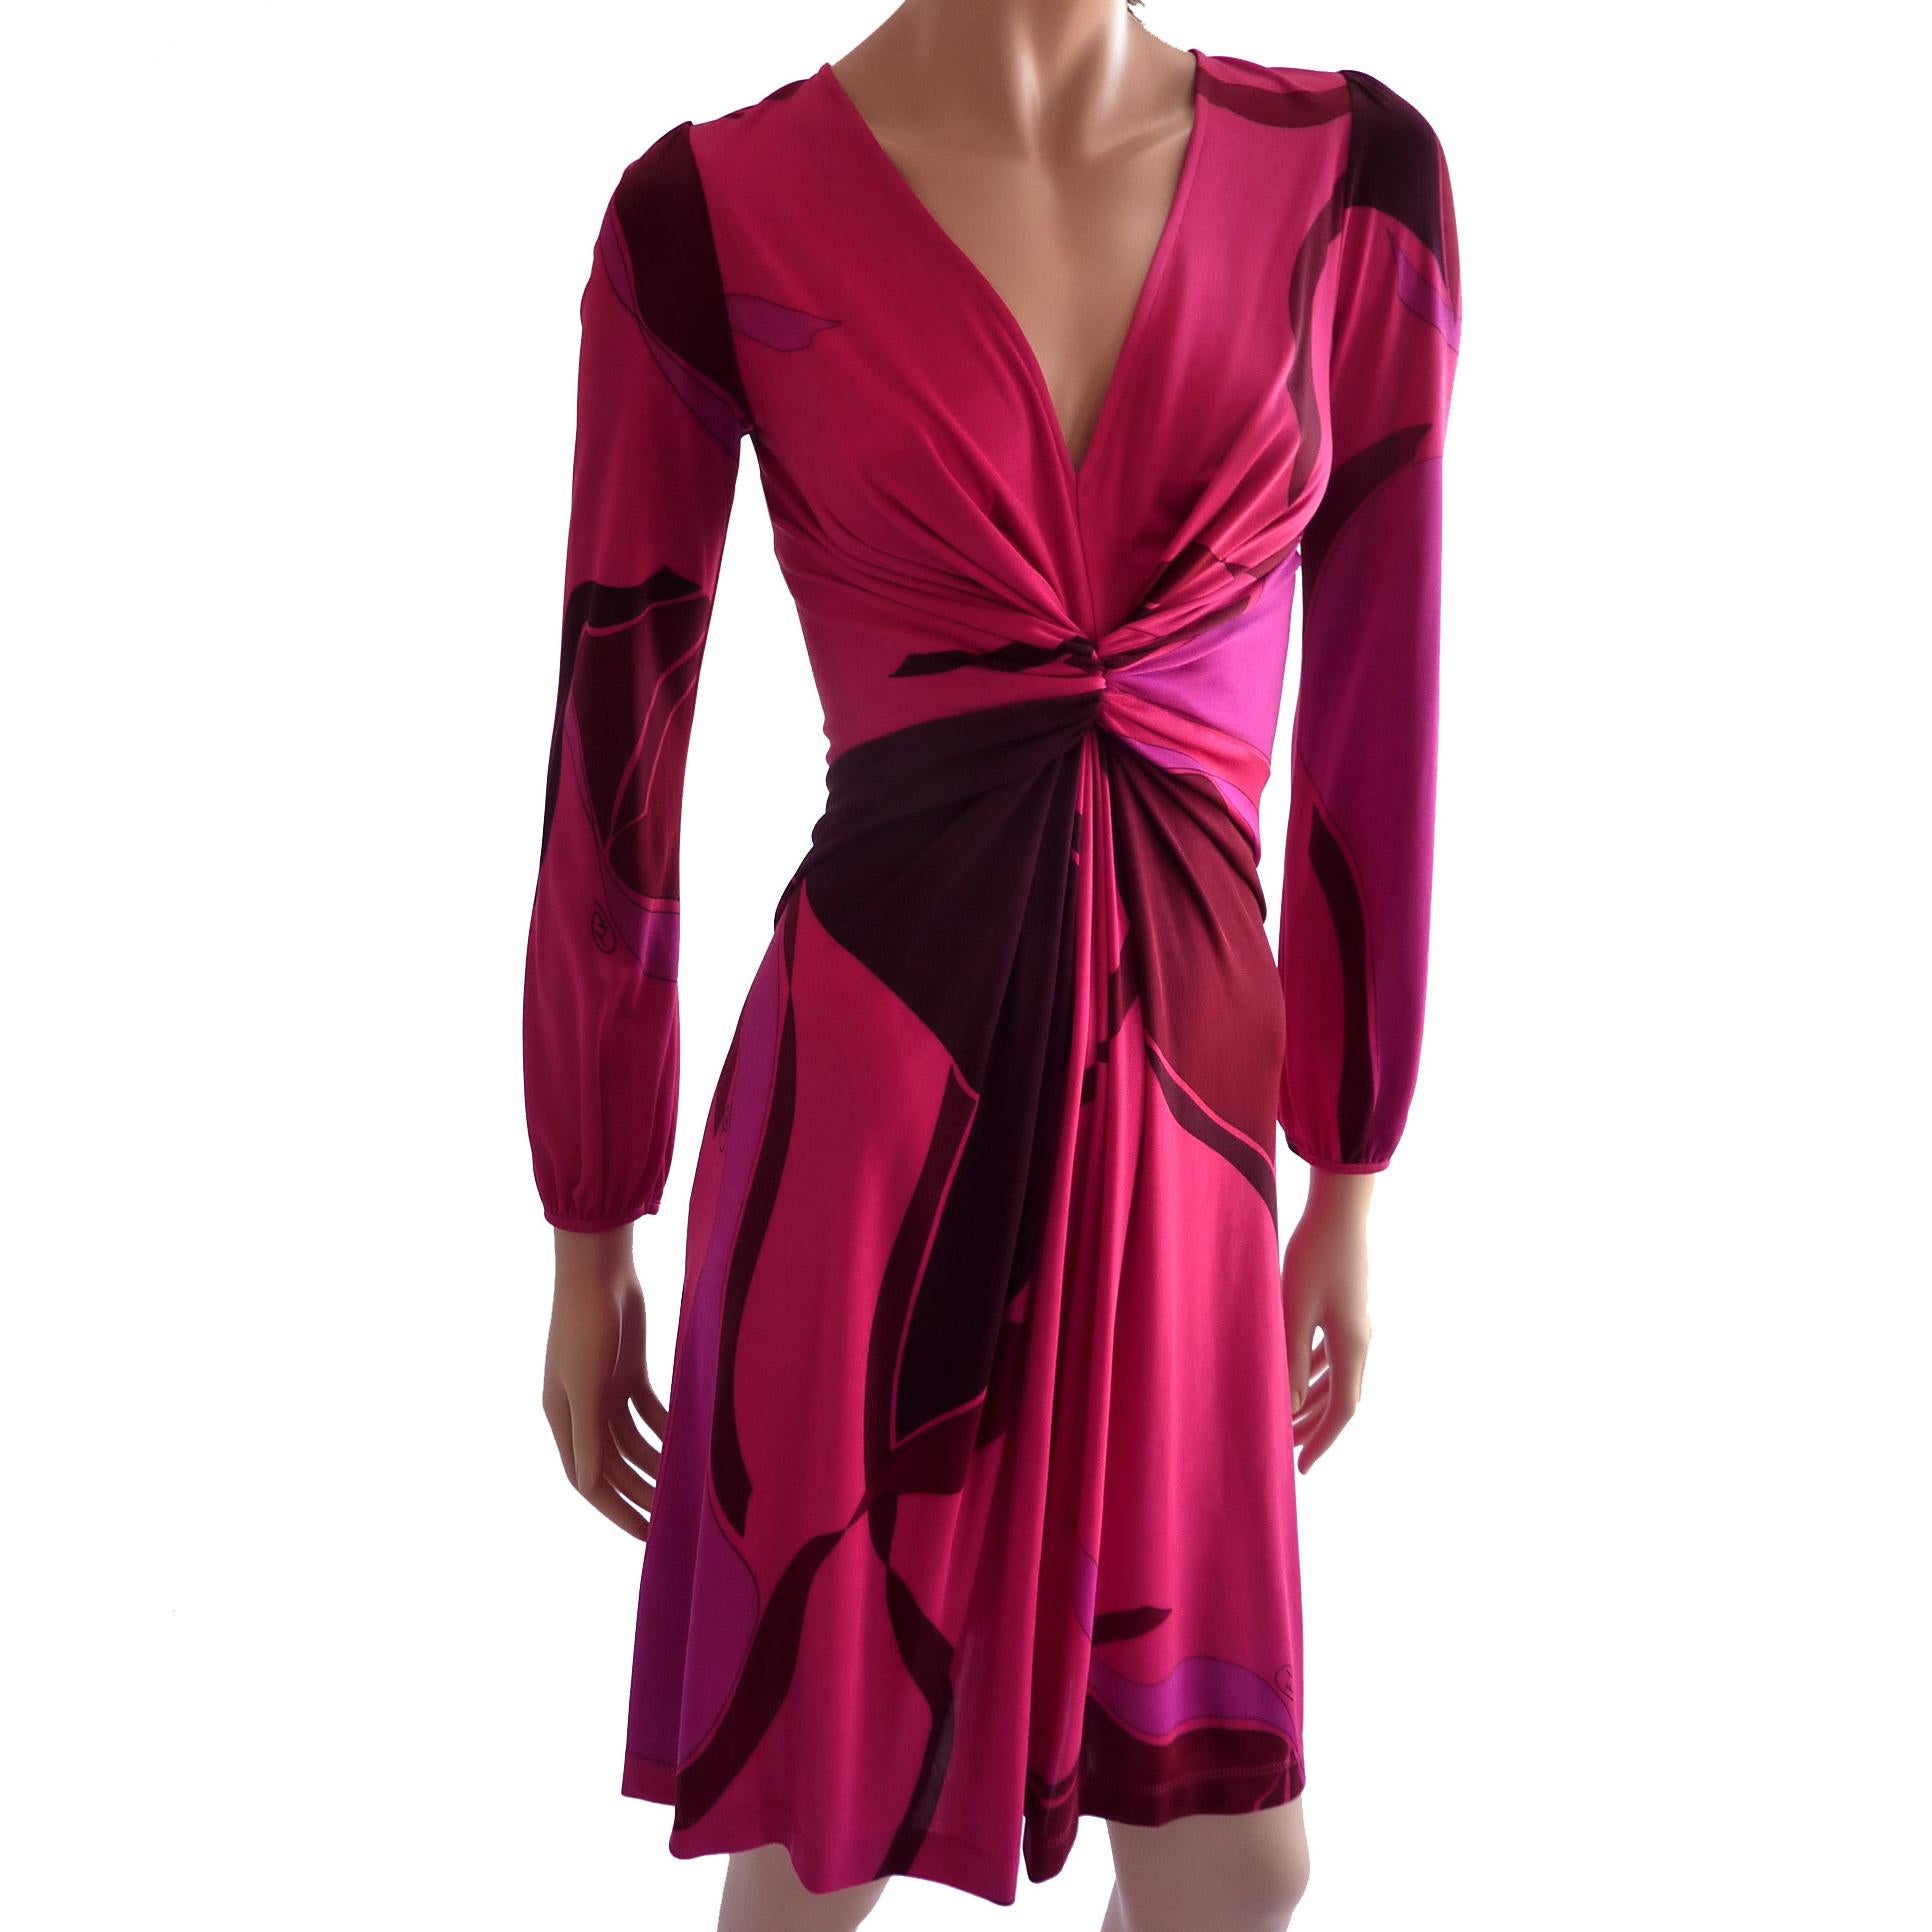 Flattering and seductive silk jersey dress in Flora's deep pink abstract oversized petal print.
Invisible back zipper for easy entry. Flared skirt with hidden volume,
Approximately 39